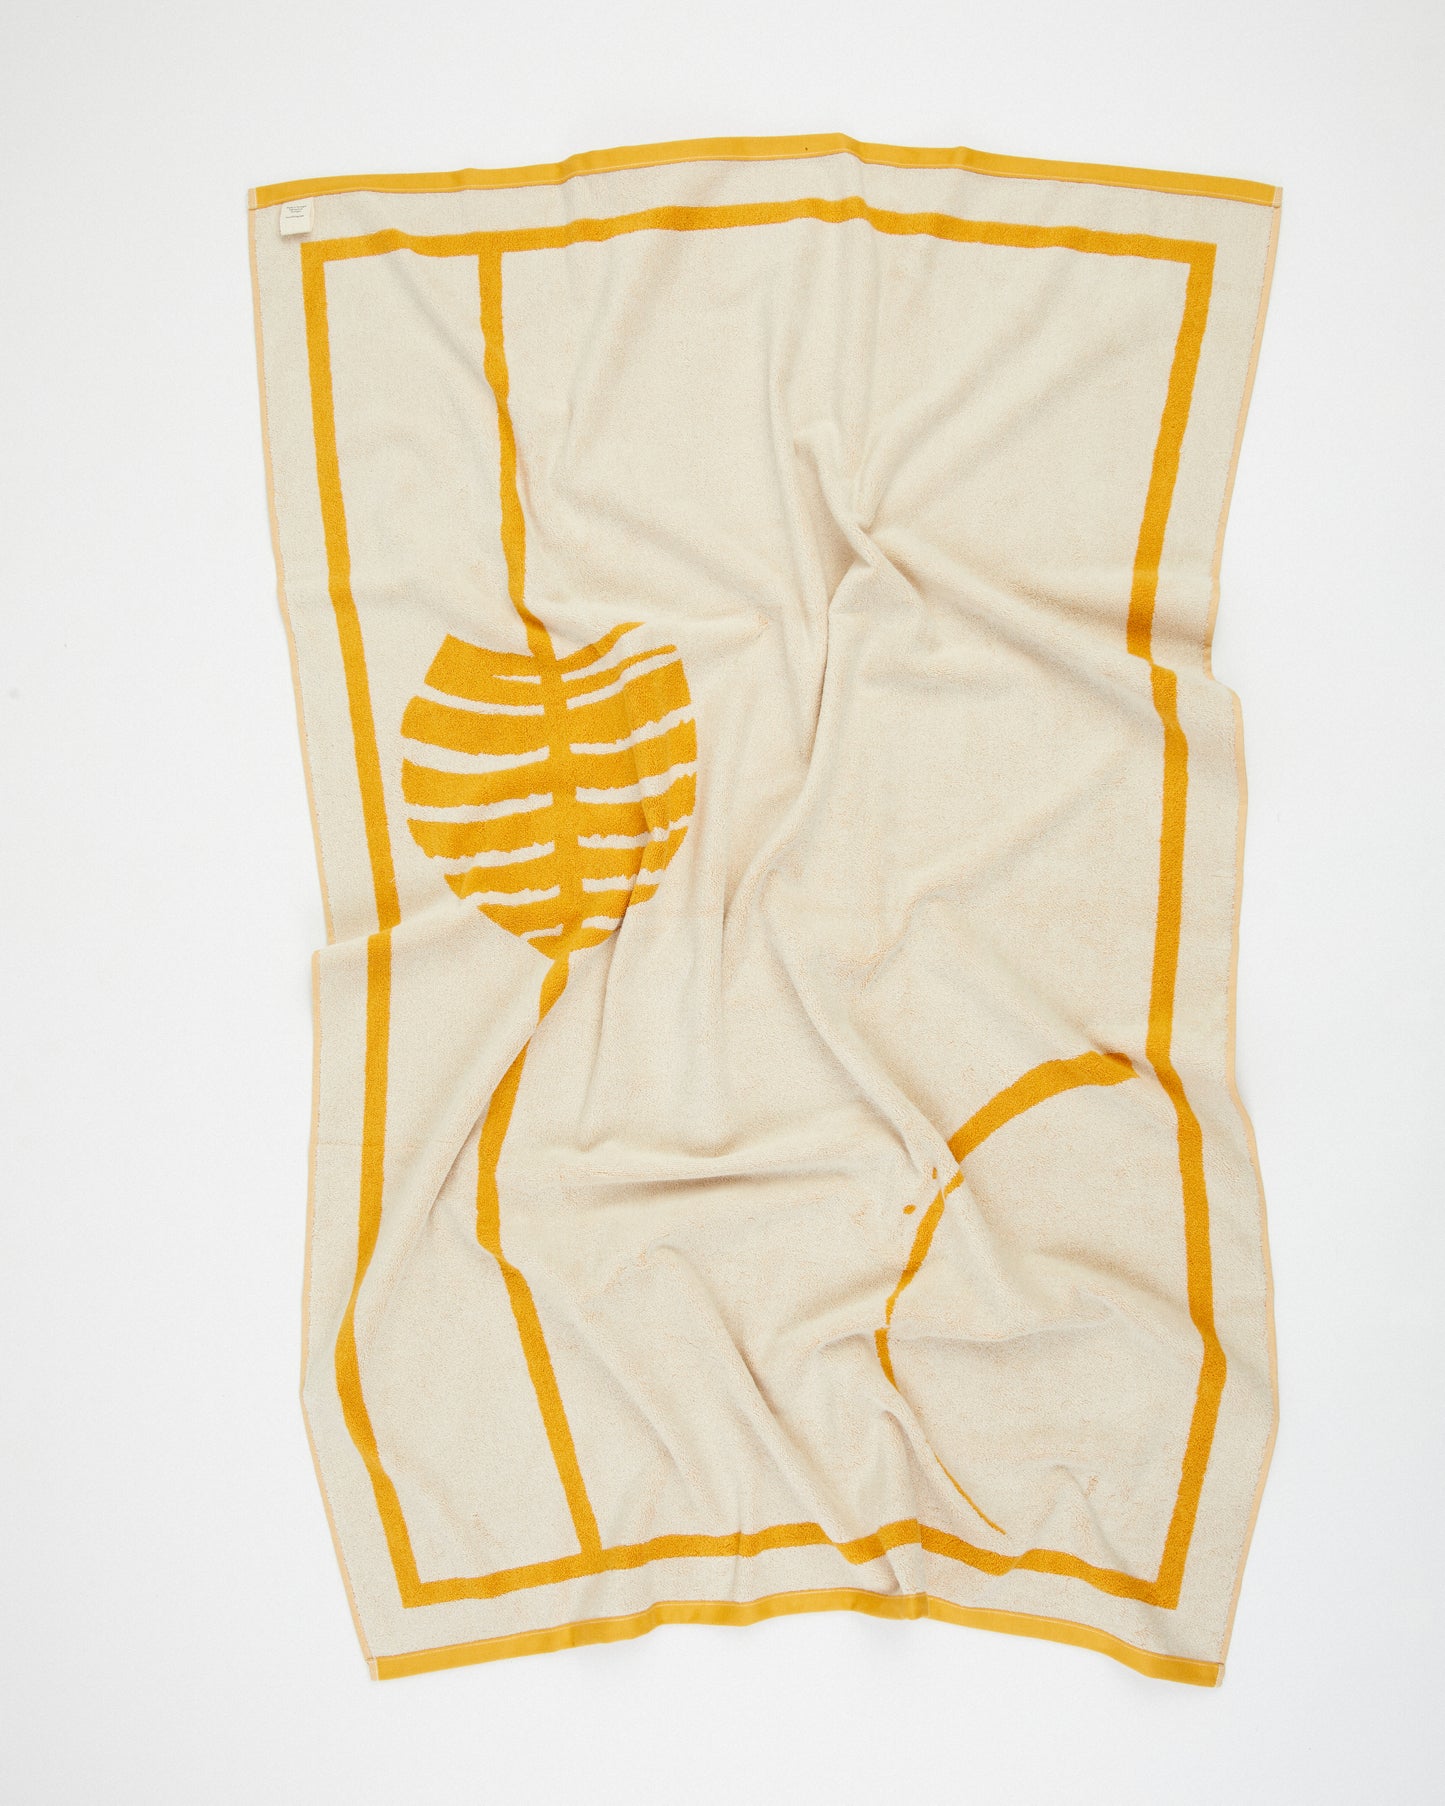 The Bee and Classic Towel Pair